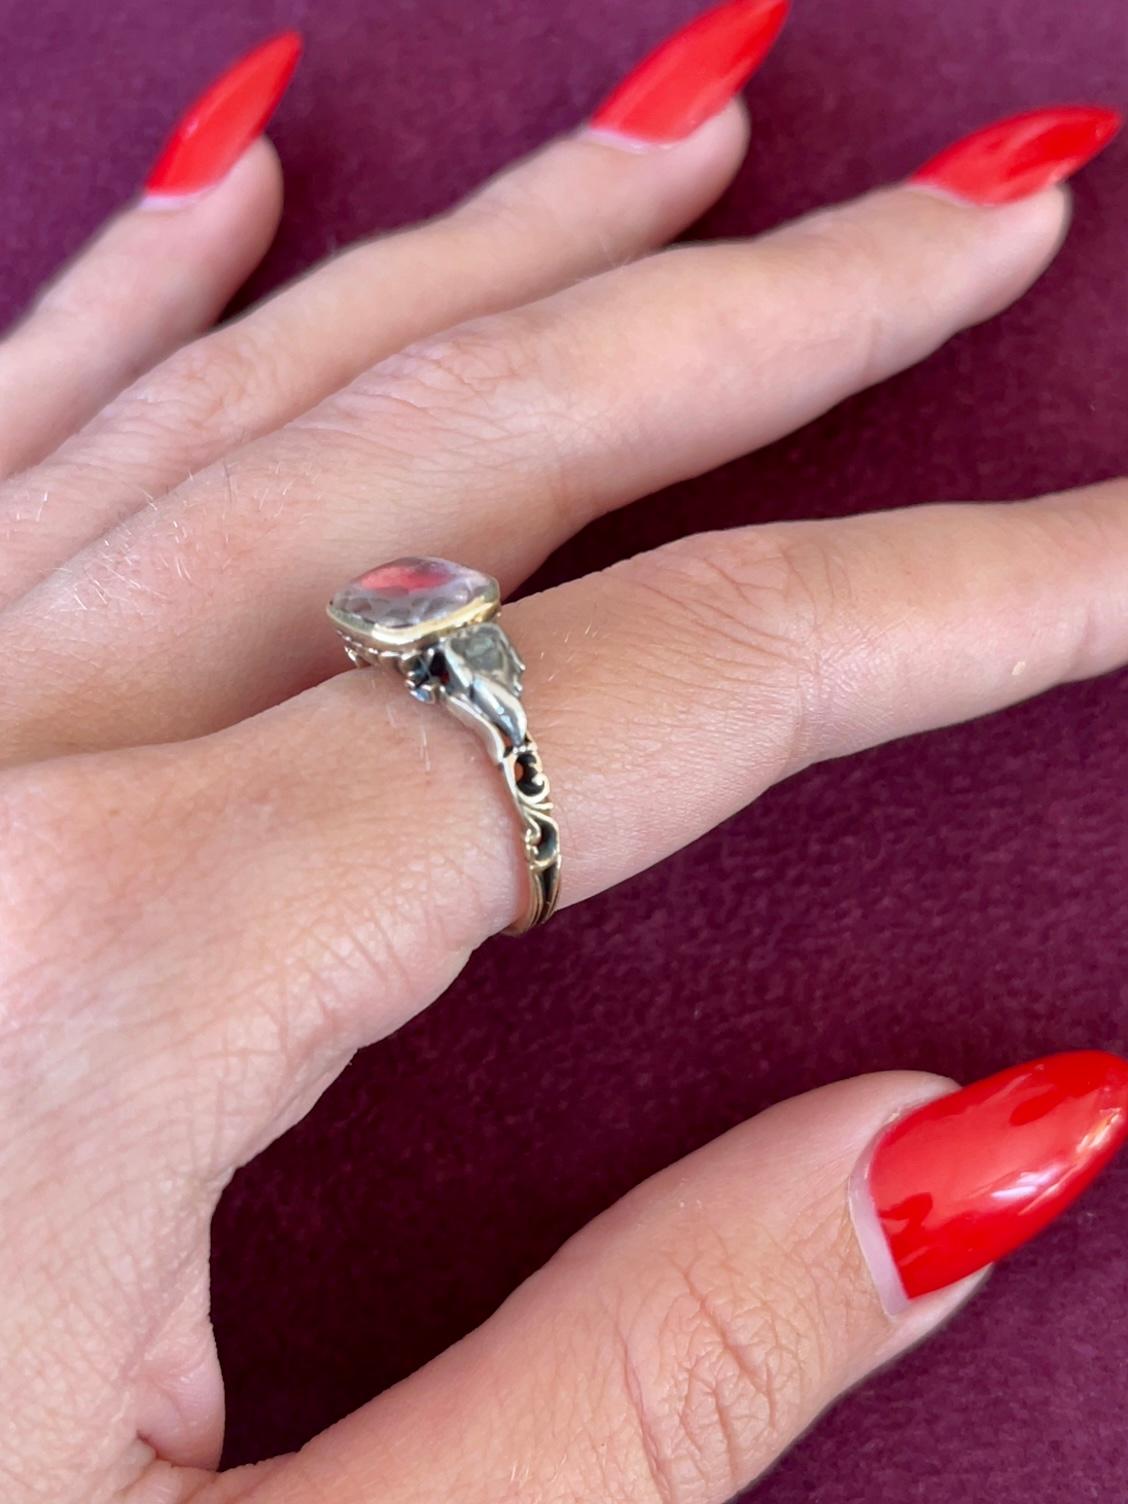 A wonderful Georgian ring which is composed of a large Paste and Old European cut Diamonds on either side full of the grace and splendor of a bygone age.
The central stone is encased in a Red tin foil, which gives it the reddish/pink color,

The 18k